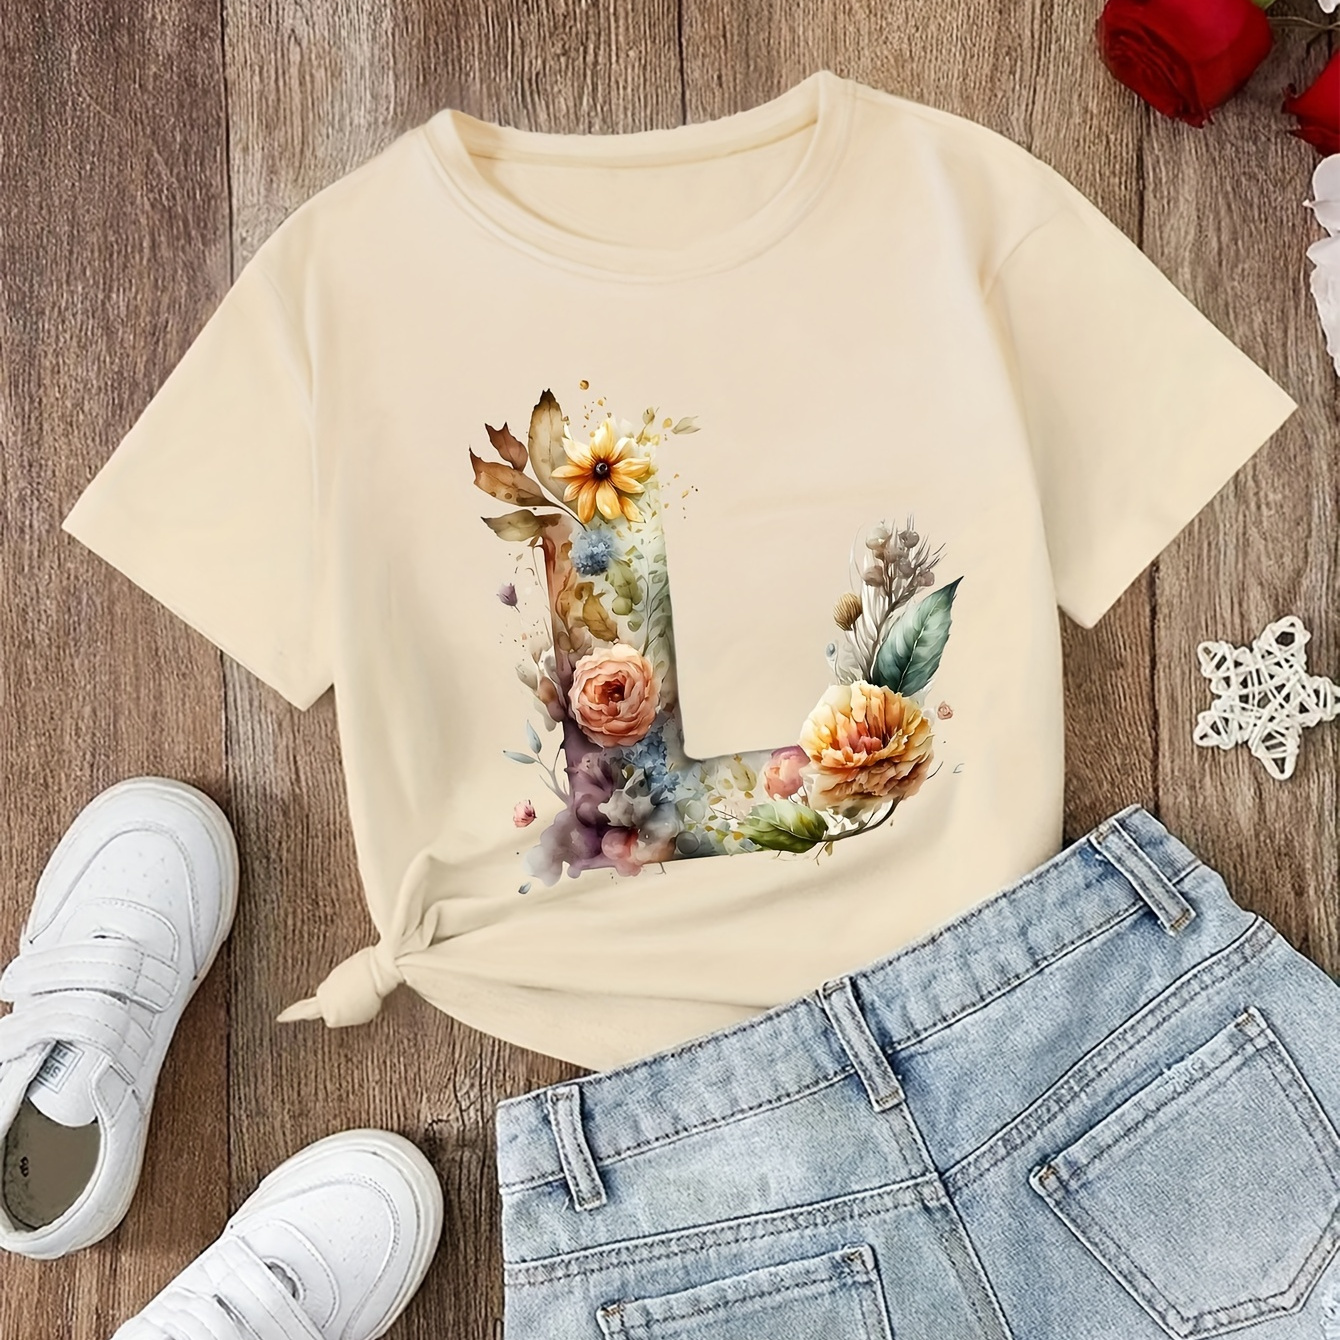 

Letter-l Print Creative T-shirts, Soft & Elastic Comfy Cotton Crew Neck Short Sleeve Tee, Girls' Daily Wear Top